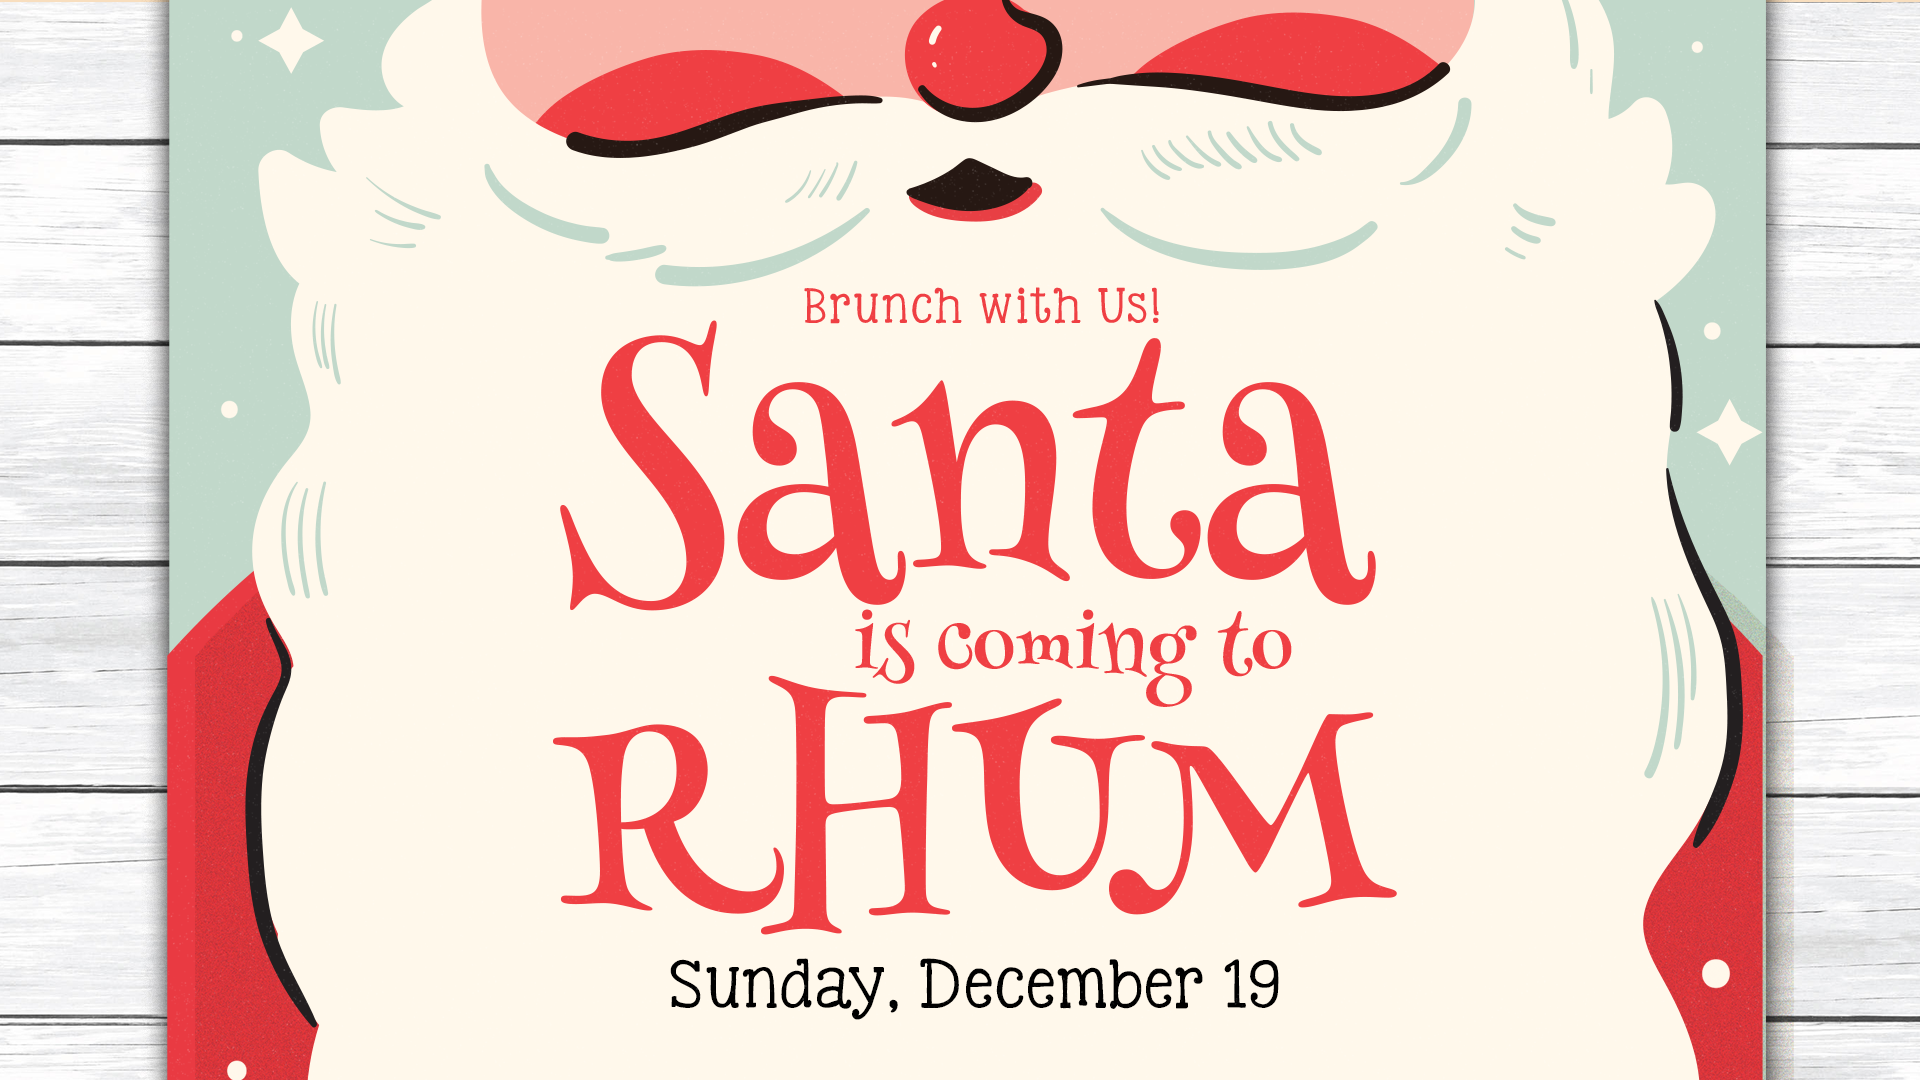 Santa Brunch at RHUM! Reservations required. Call 631-569-5944